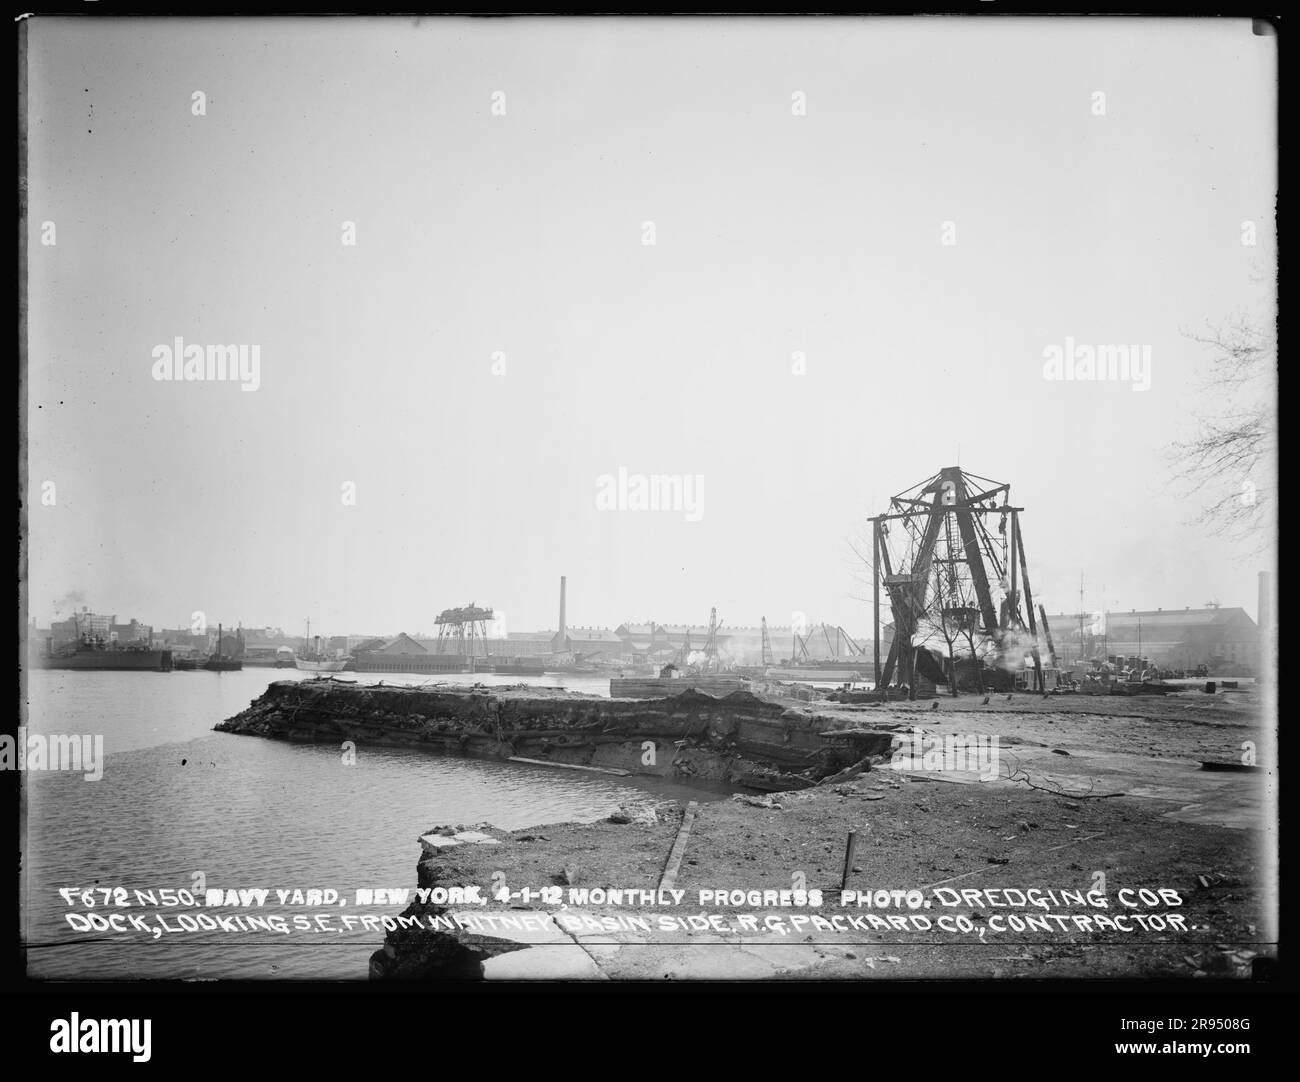 Monthly Progress Photo, Dredging Cob Dock, Looking Southeast from Whitney Basin Side, R. G. Packard Company, Contractor. Glass Plate Negatives of the Construction and Repair of Buildings, Facilities, and Vessels at the New York Navy Yard. Stock Photo